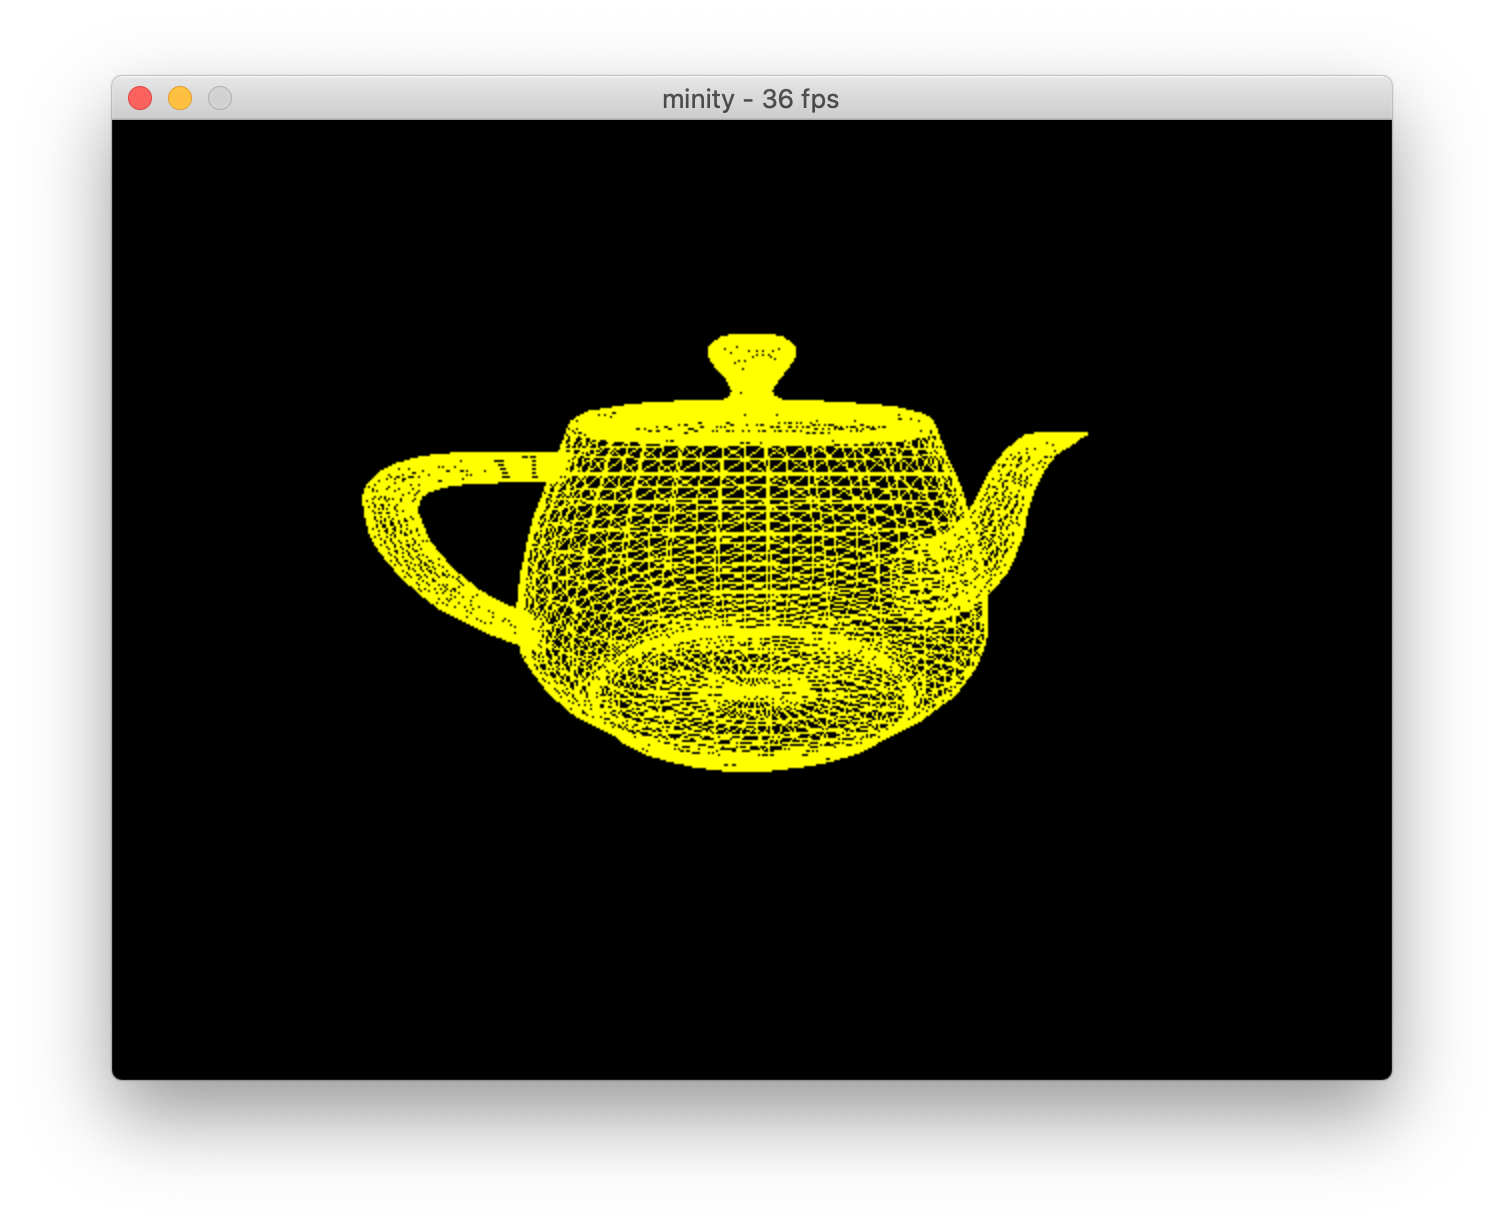 Minity spinning a Utah teapot wireframe